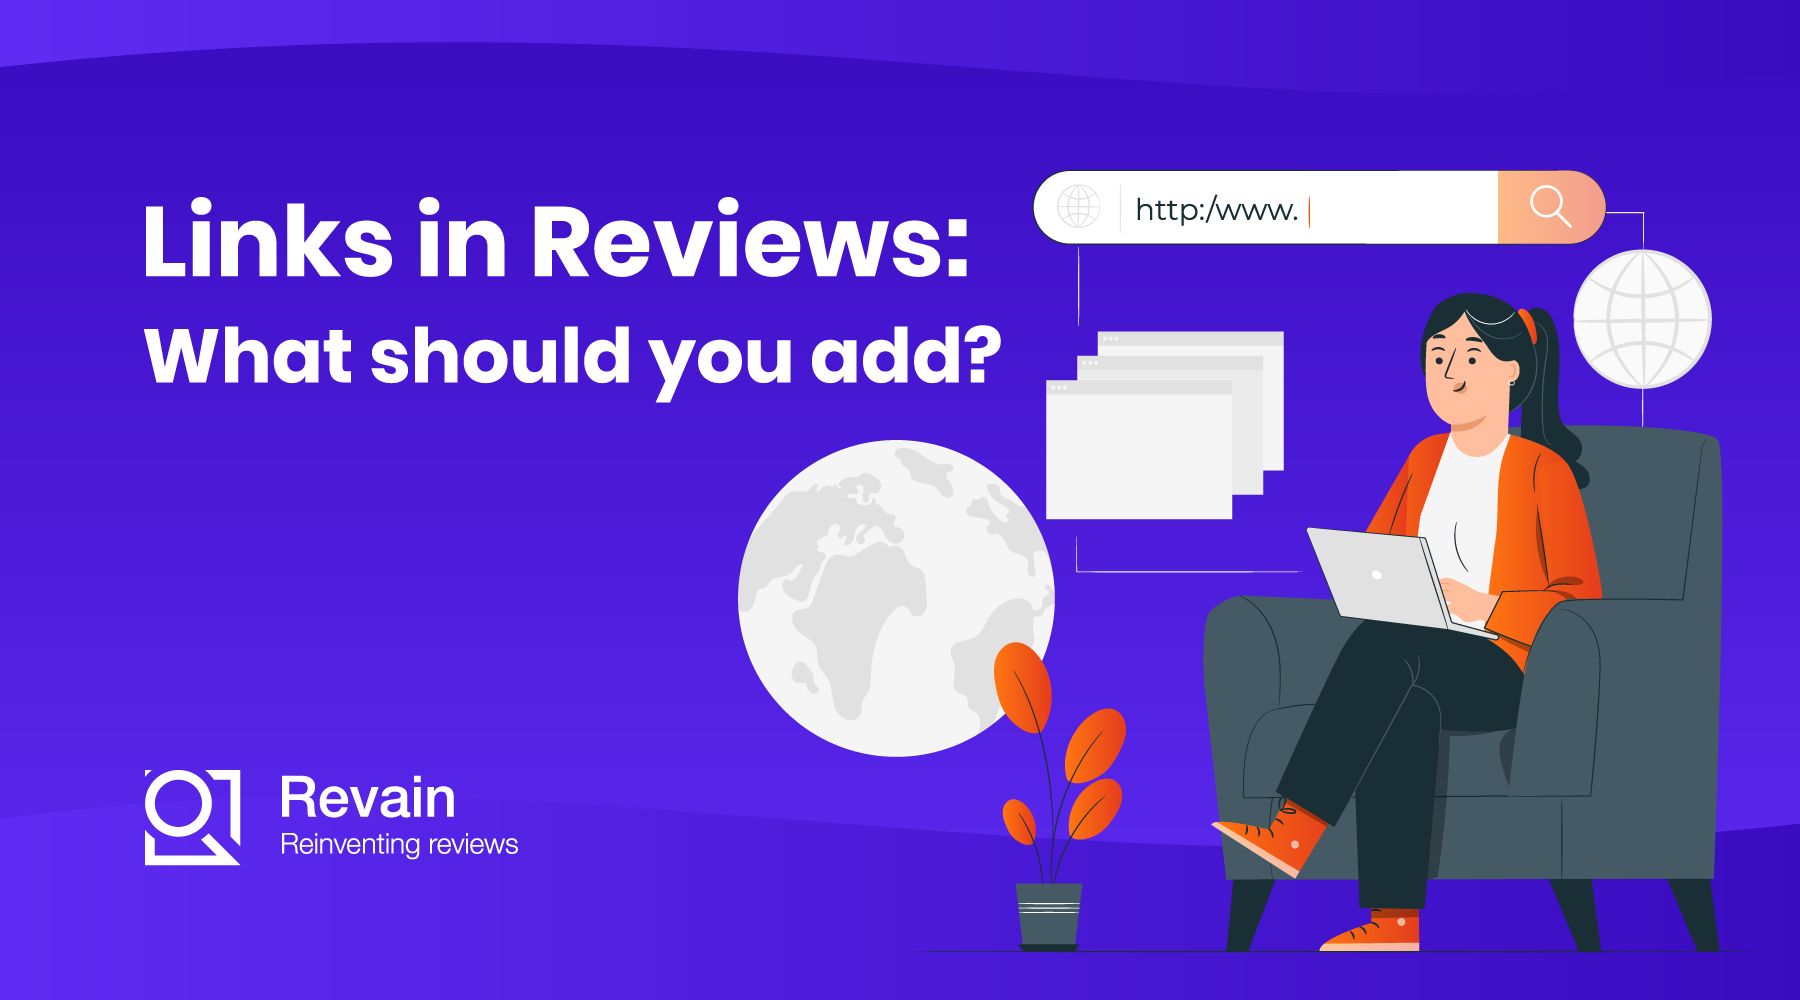 Article Links in reviews: what should you add?